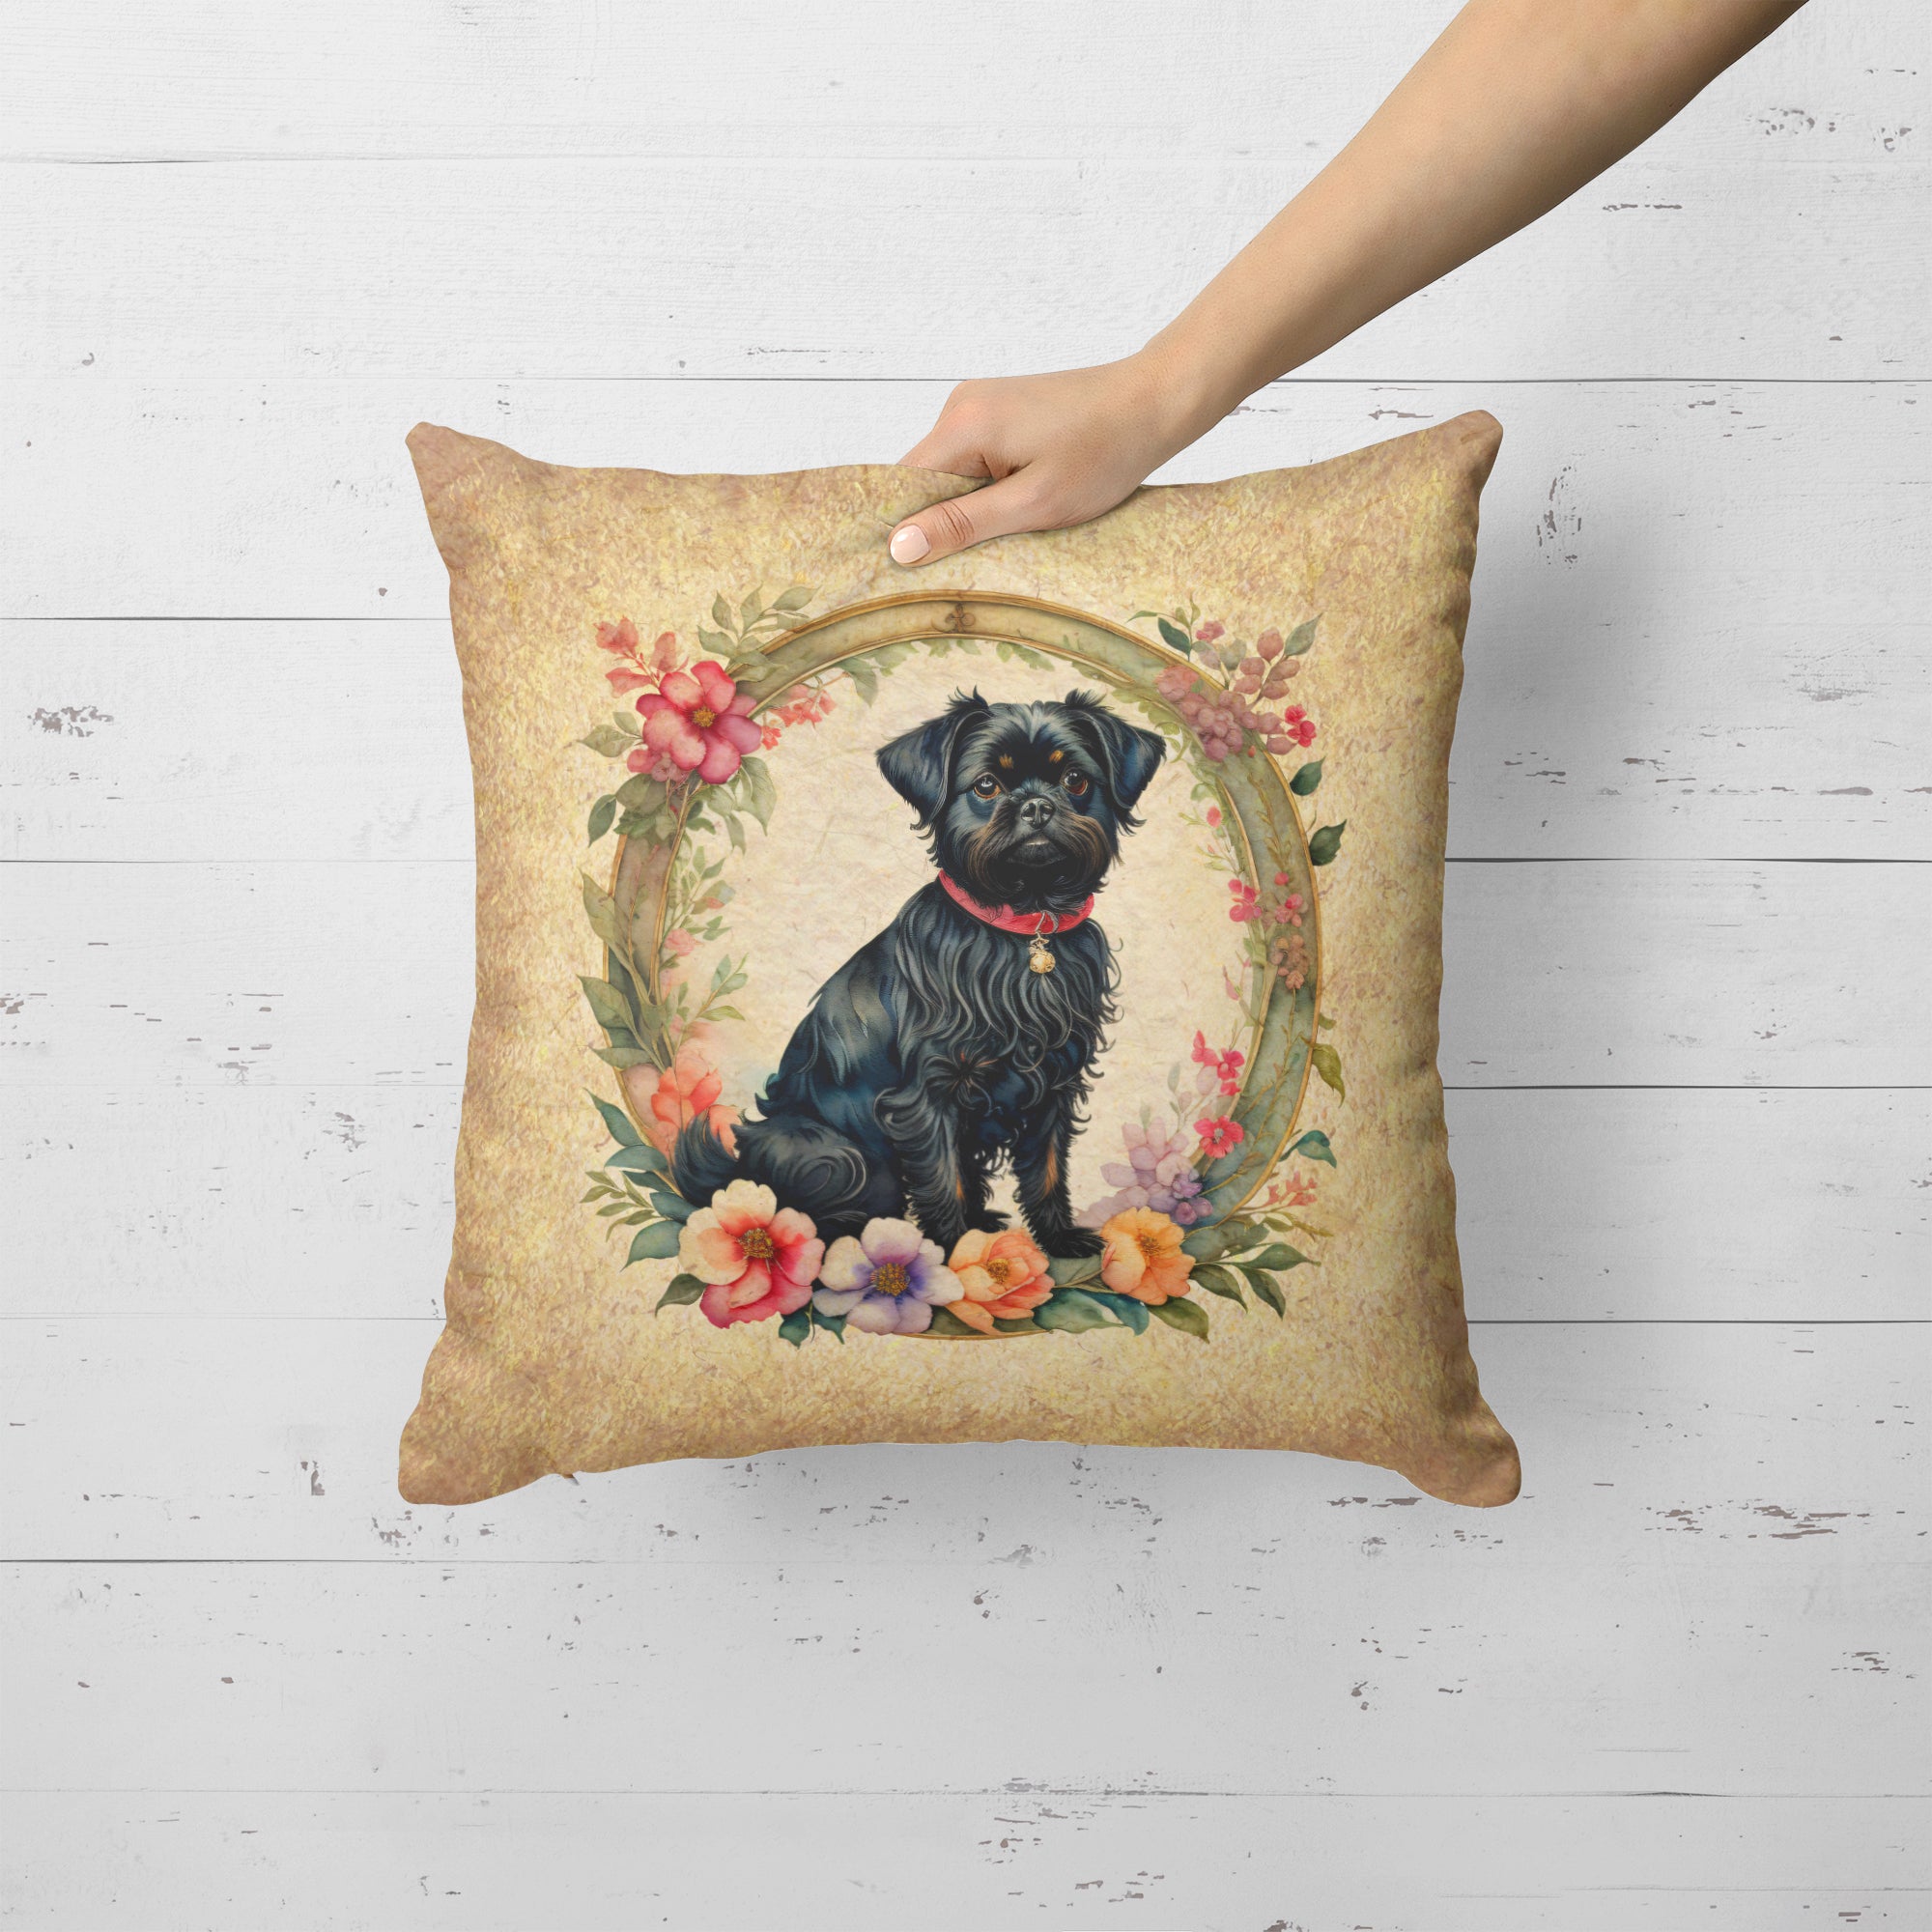 Buy this Affenpinscher and Flowers Fabric Decorative Pillow